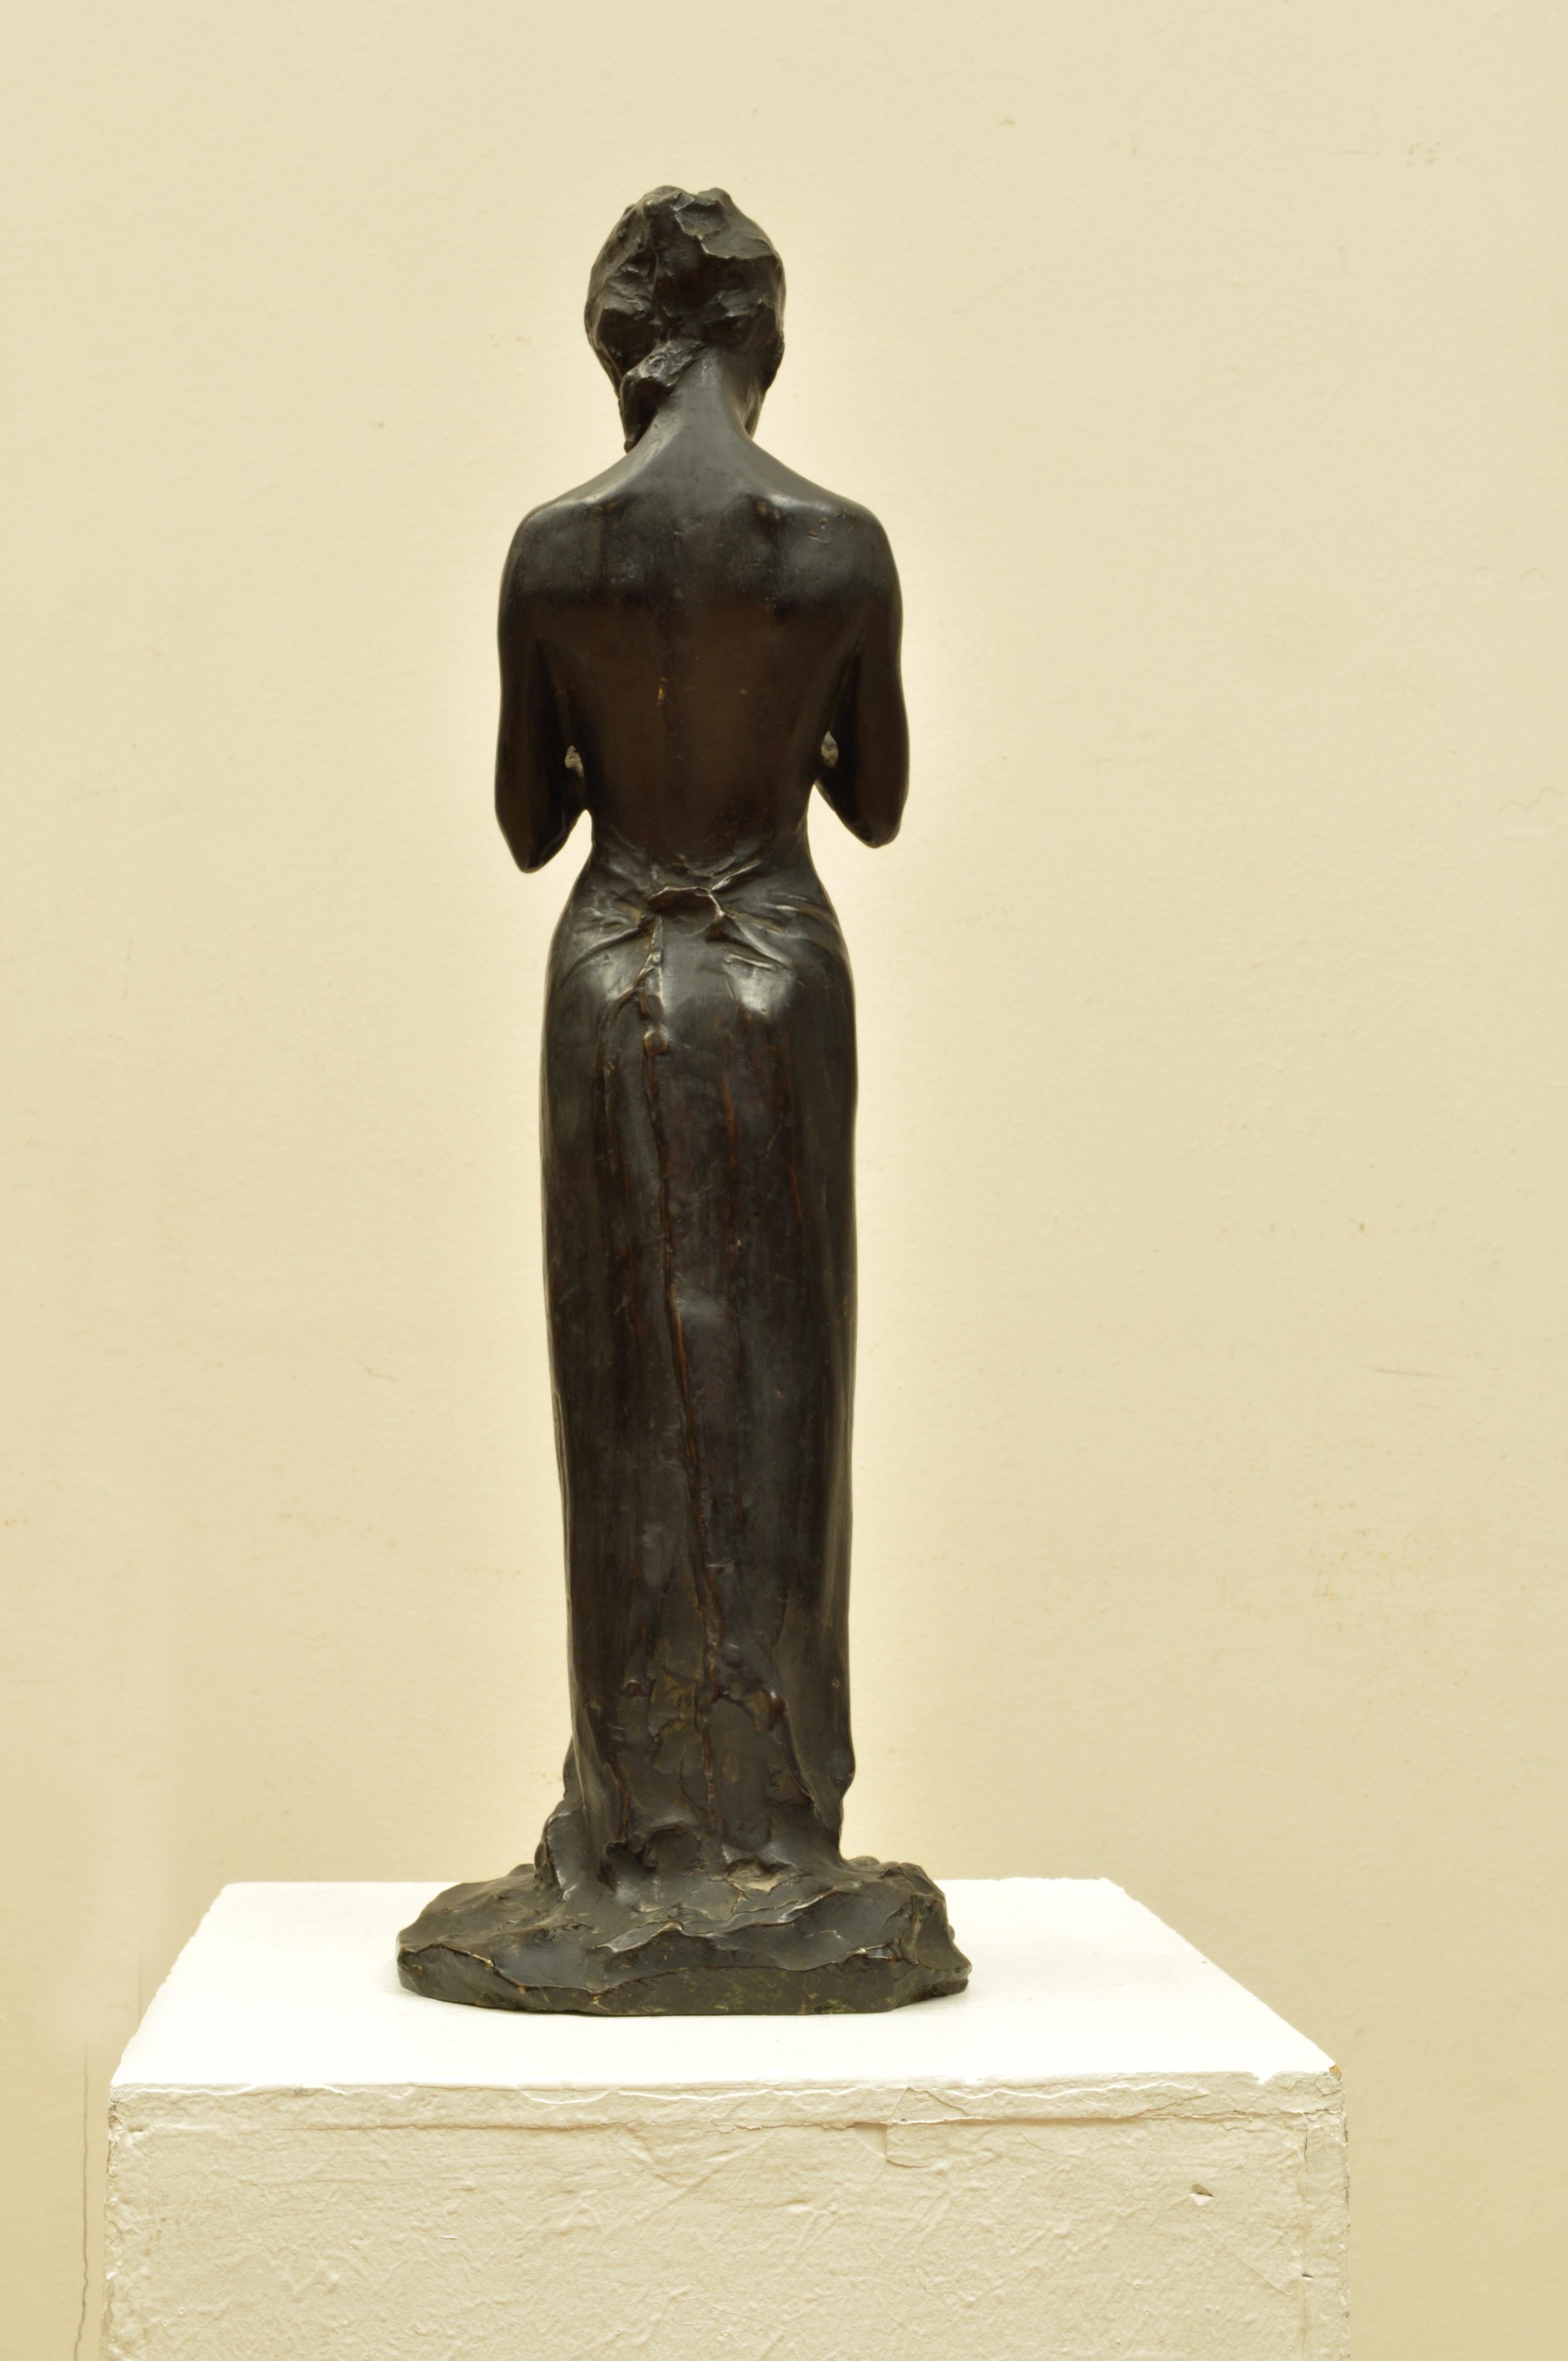 PAUL TROUBETZKOY

(Intra, 1866 - Pallanza, 1938)

The Girl with the Braid, 1925

Bronze, height 49 cm

Signed and dated on base 